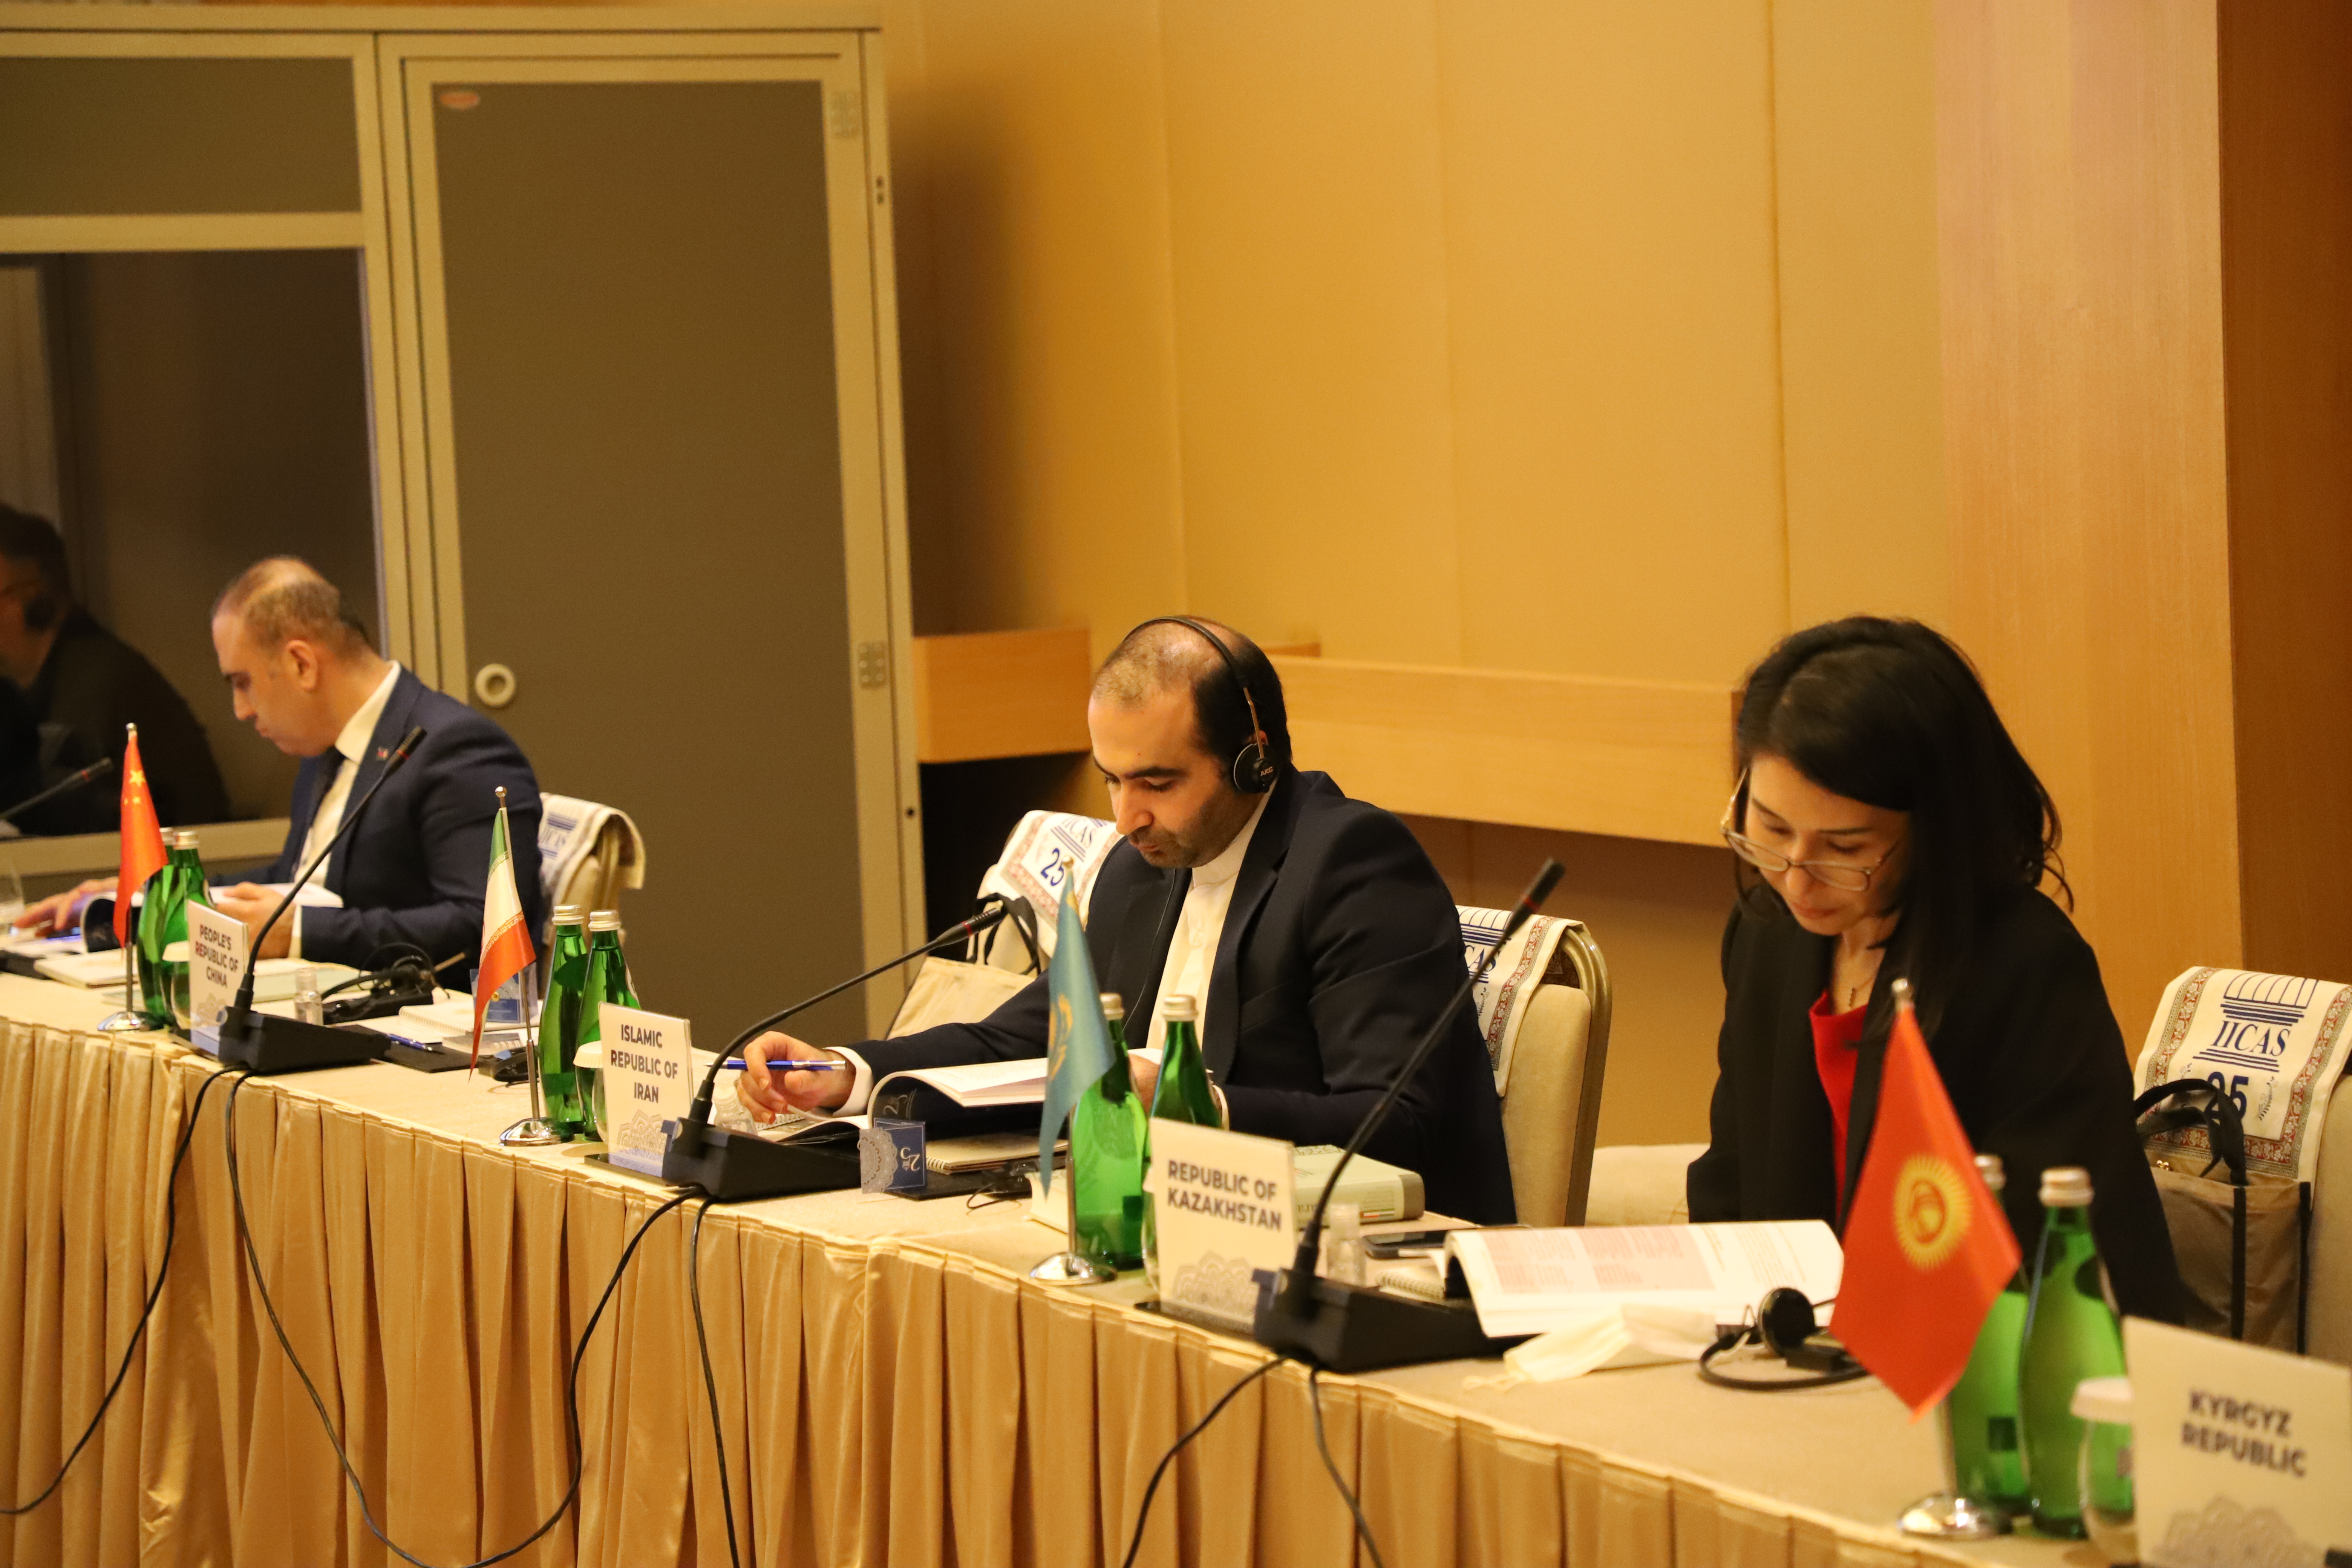 The 15th session of the General Assembly of International Institute for Central Asian Studies